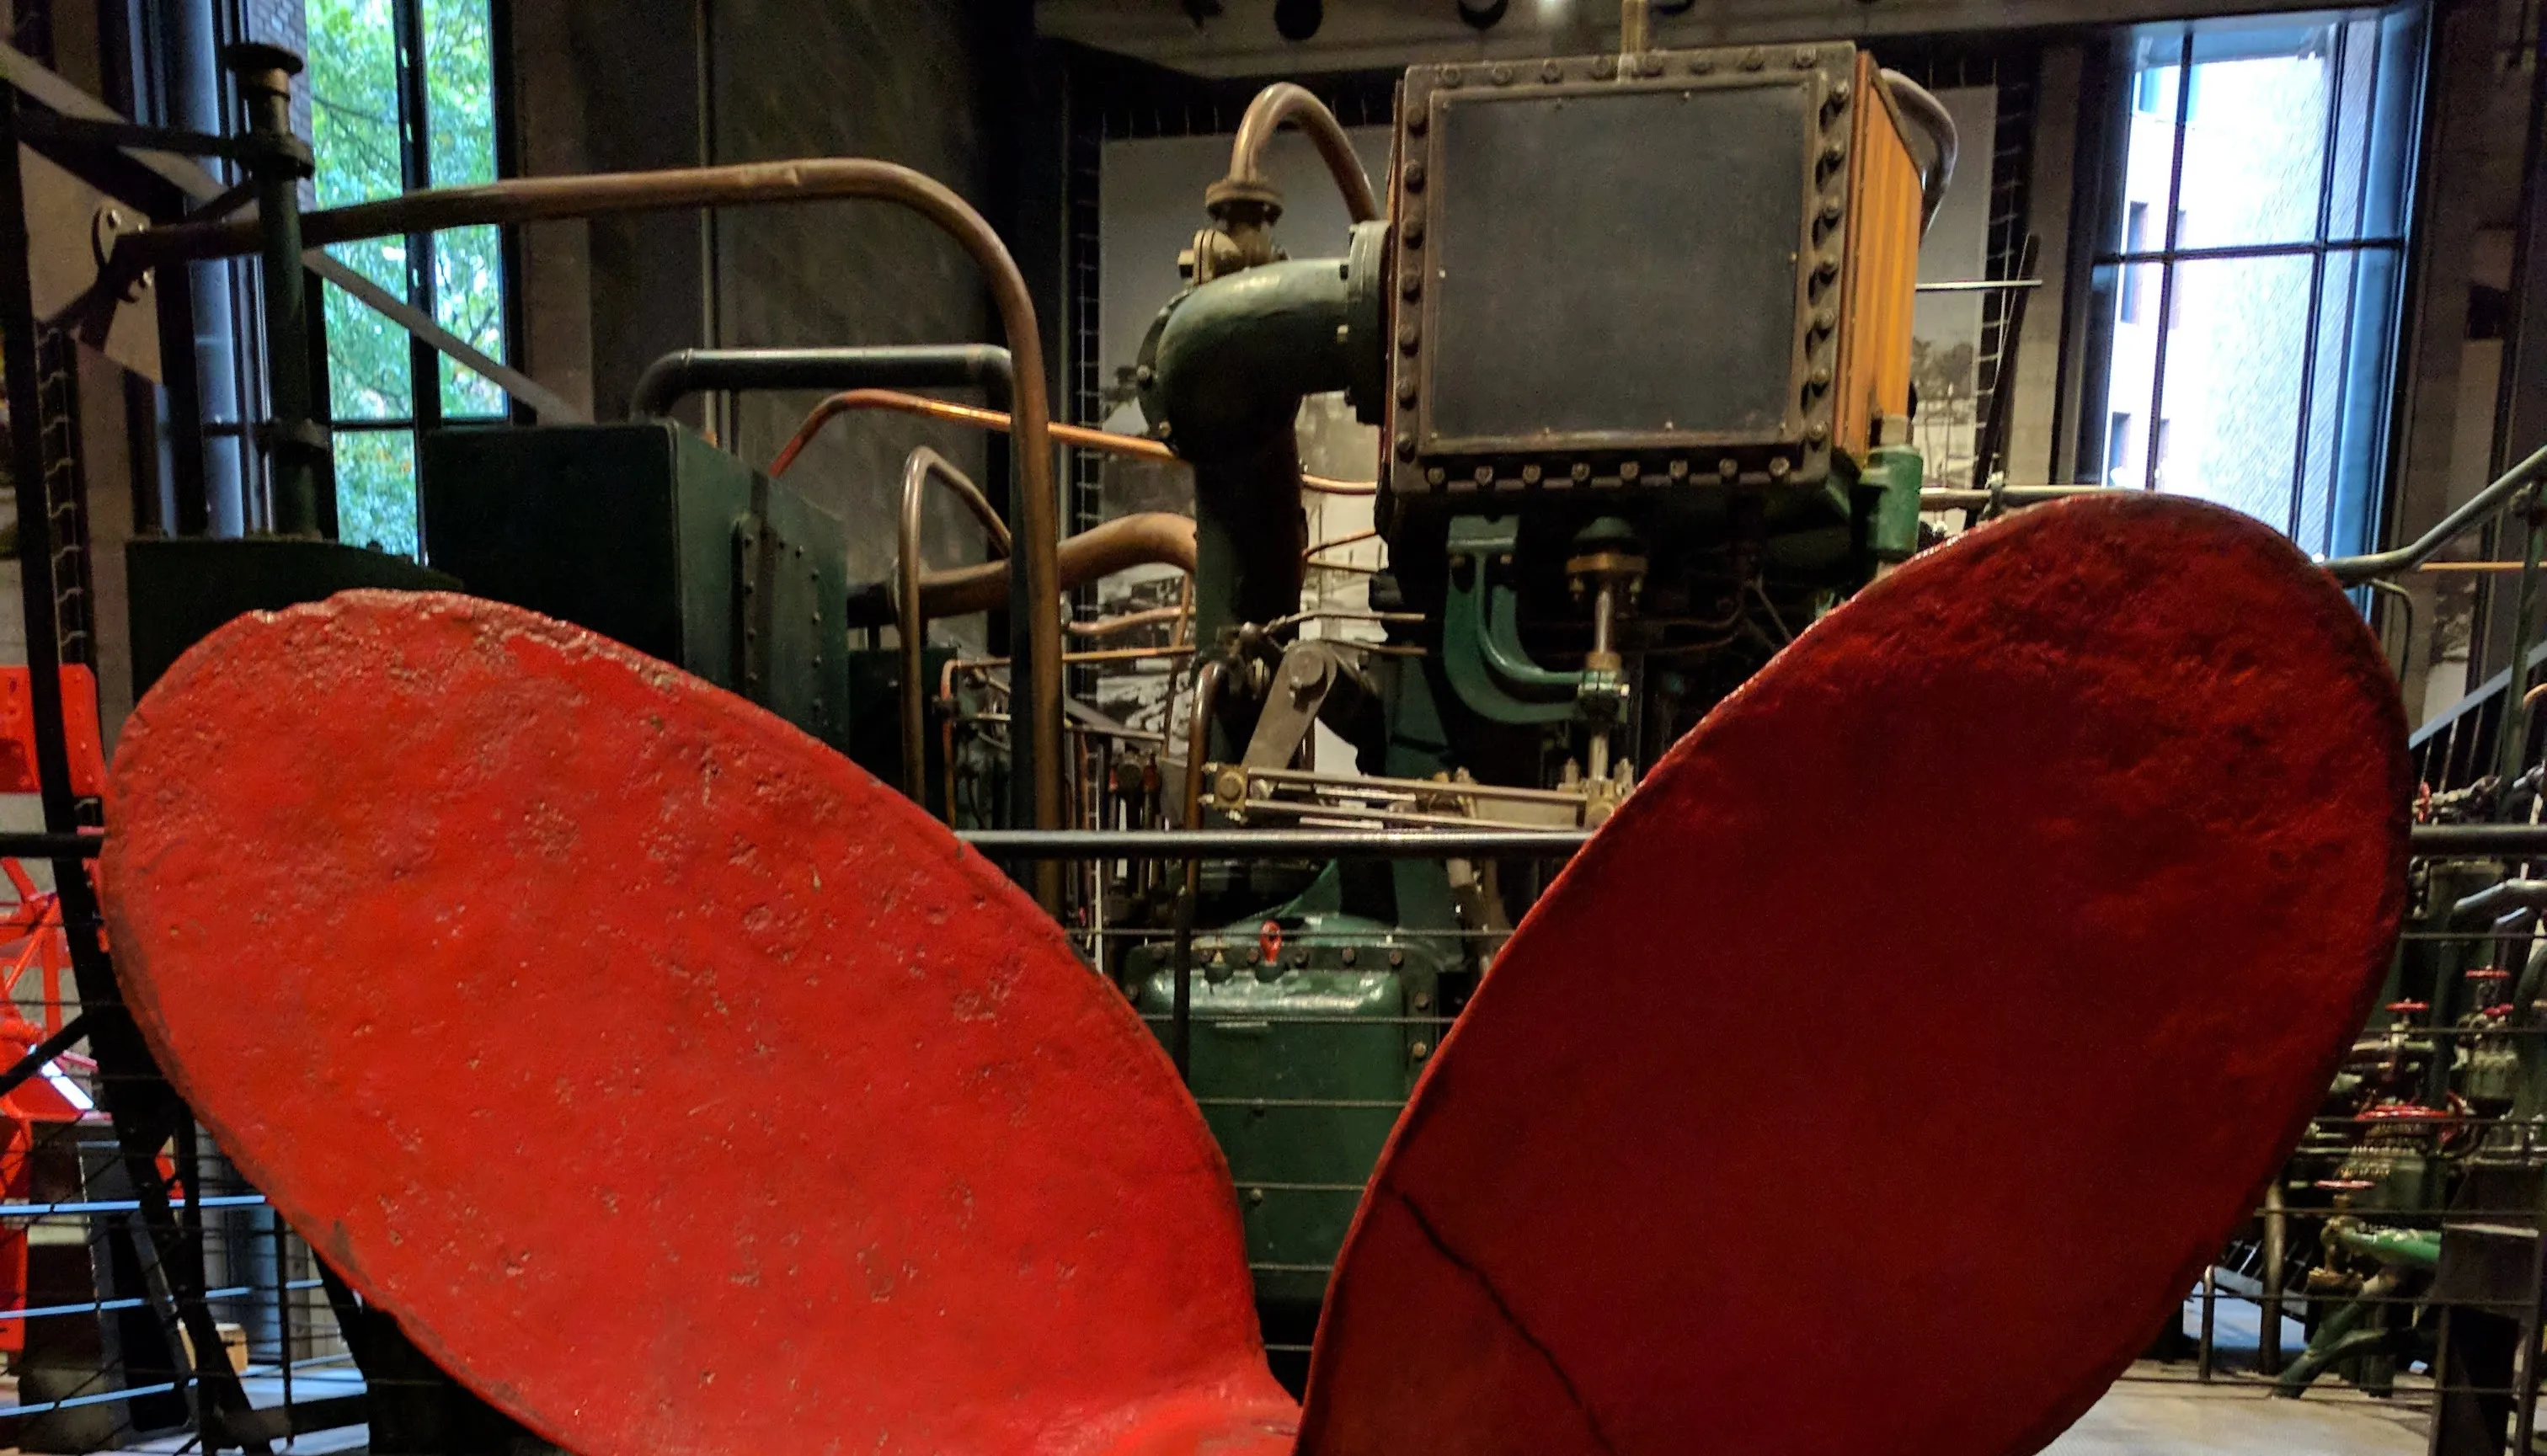 A bright red ship propeller in the foreground, steam pipes and machinery in the background.